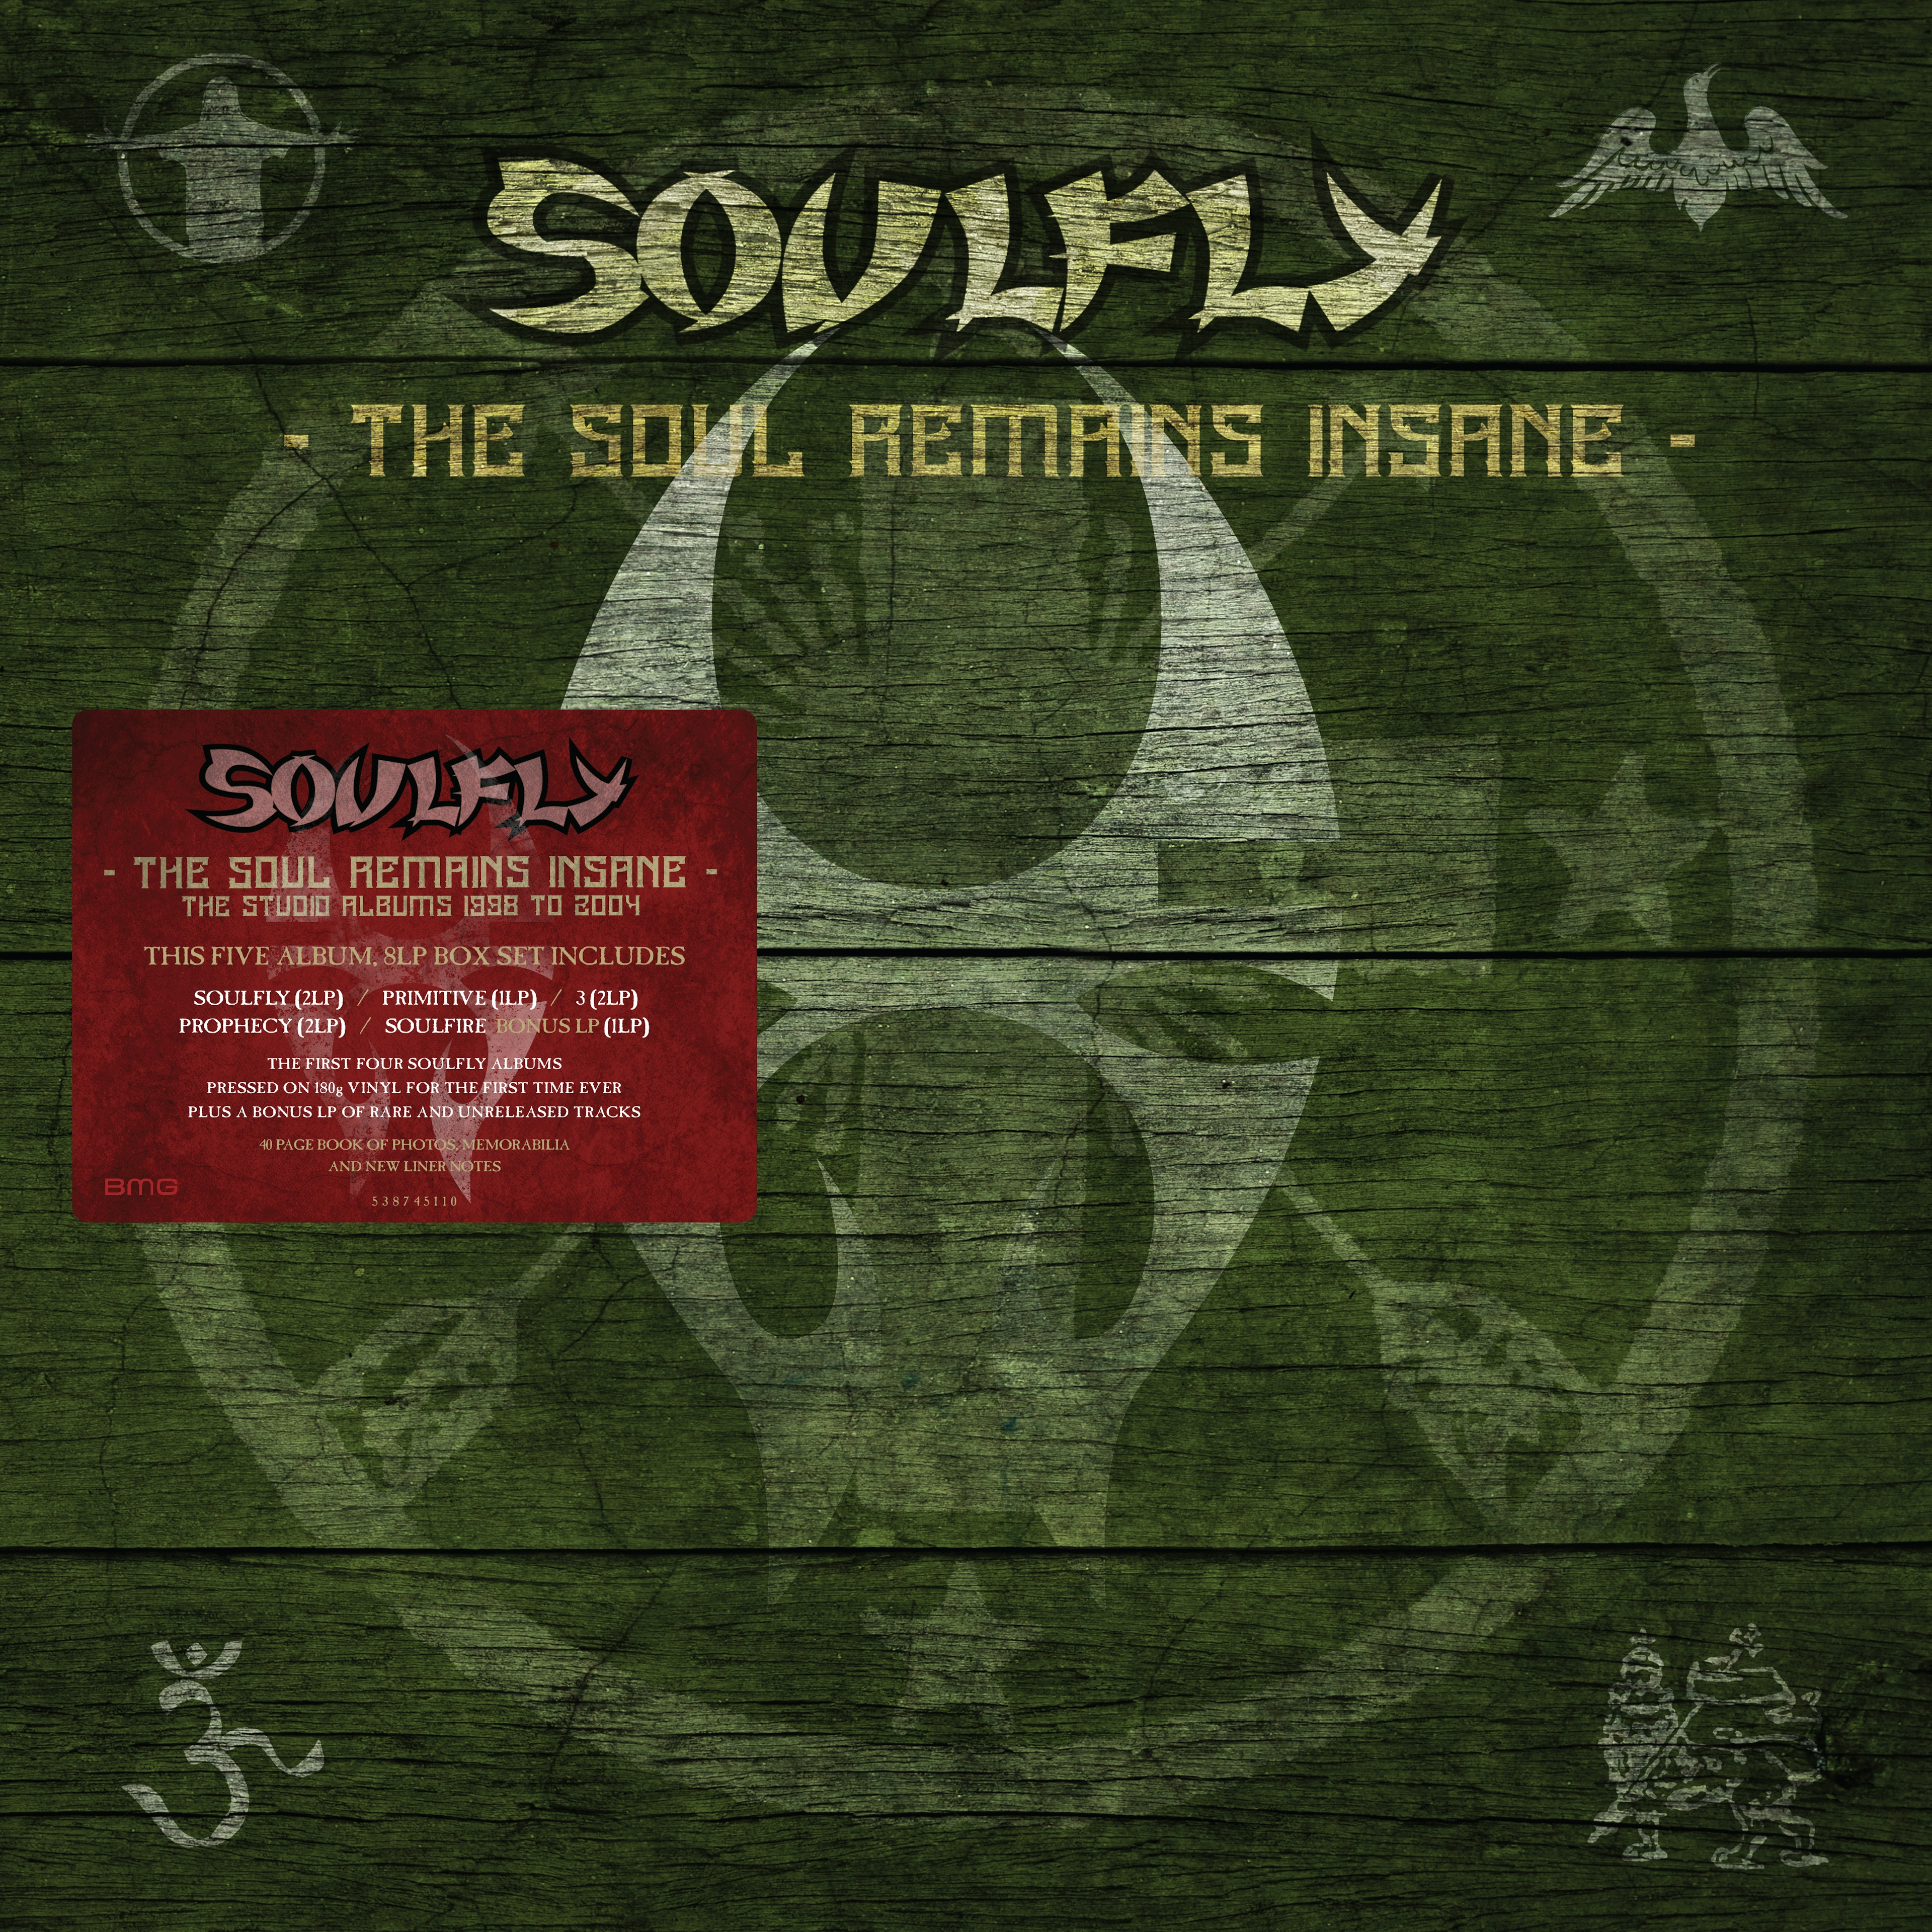 Album artwork for The Soul Remains Insane: The Studio Albums 1998 to 2004 by Soulfly